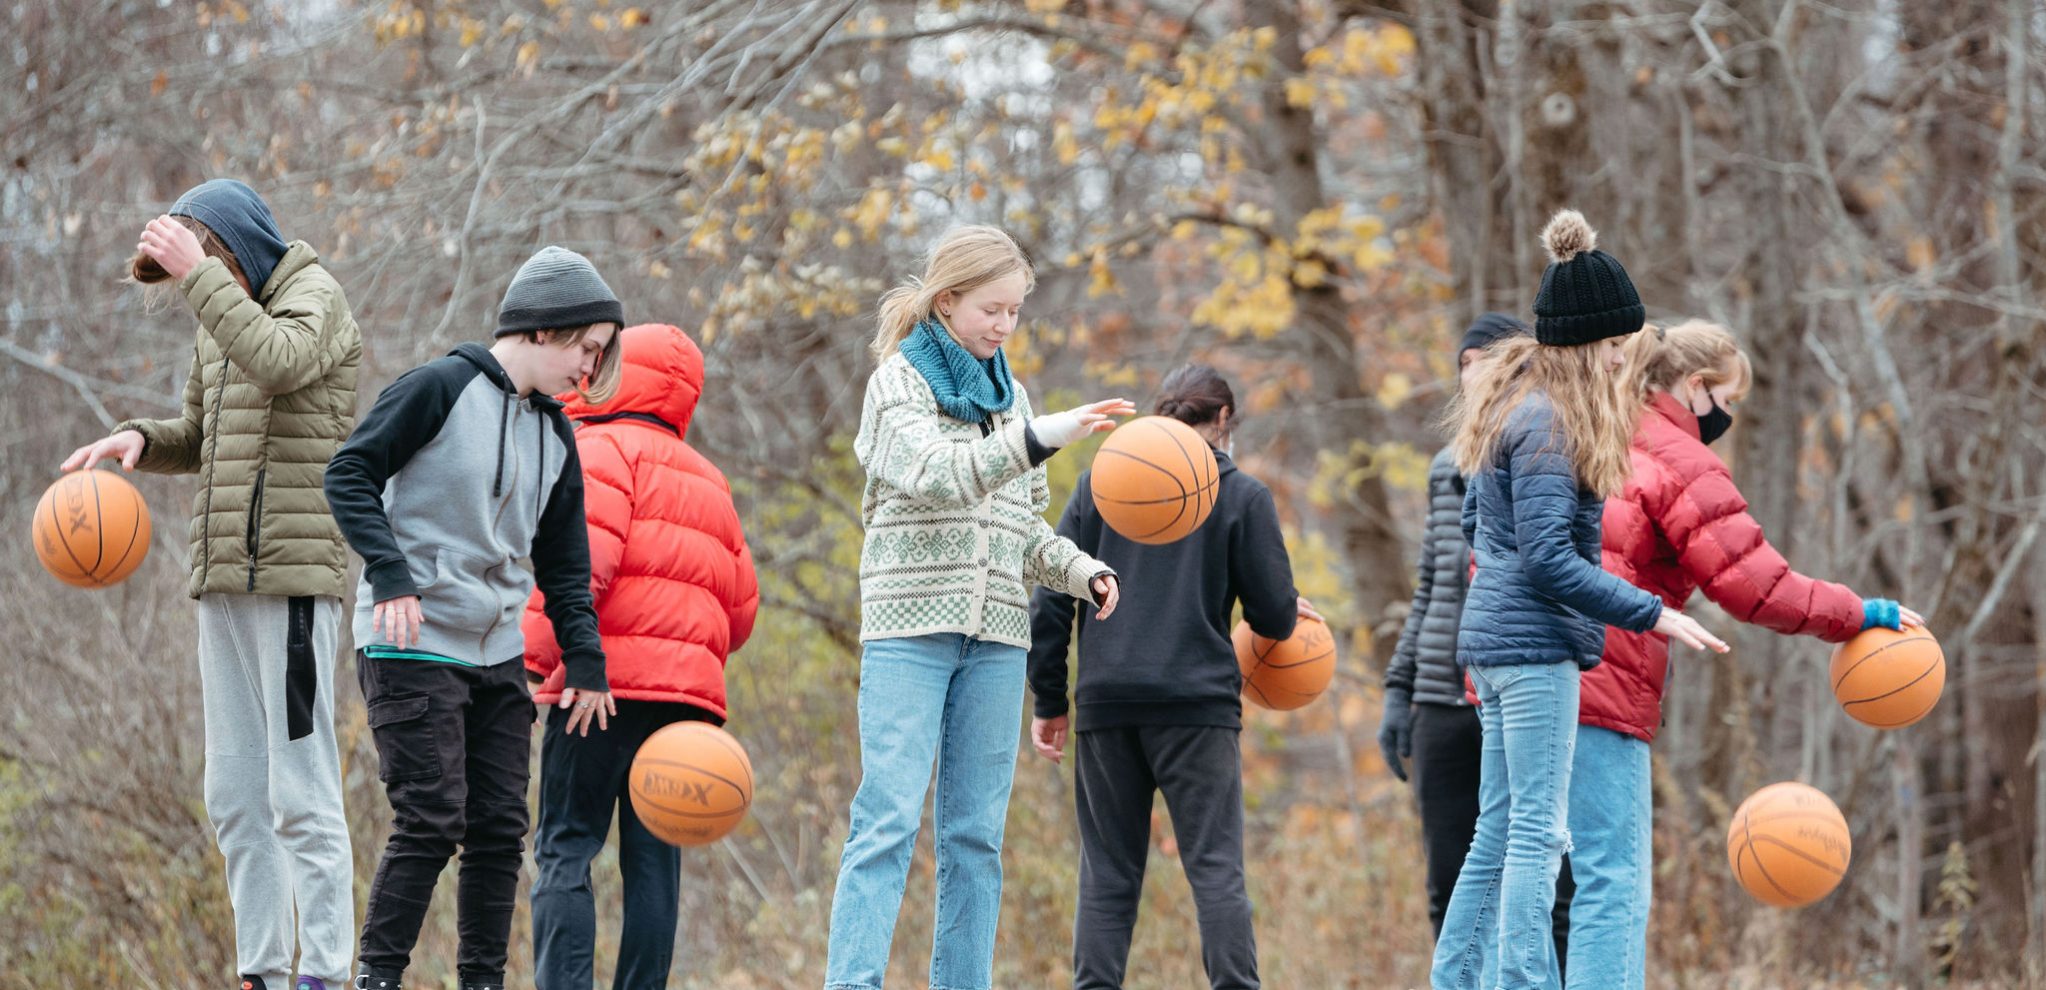 group of students dribbling basketballs outdoors in the winter